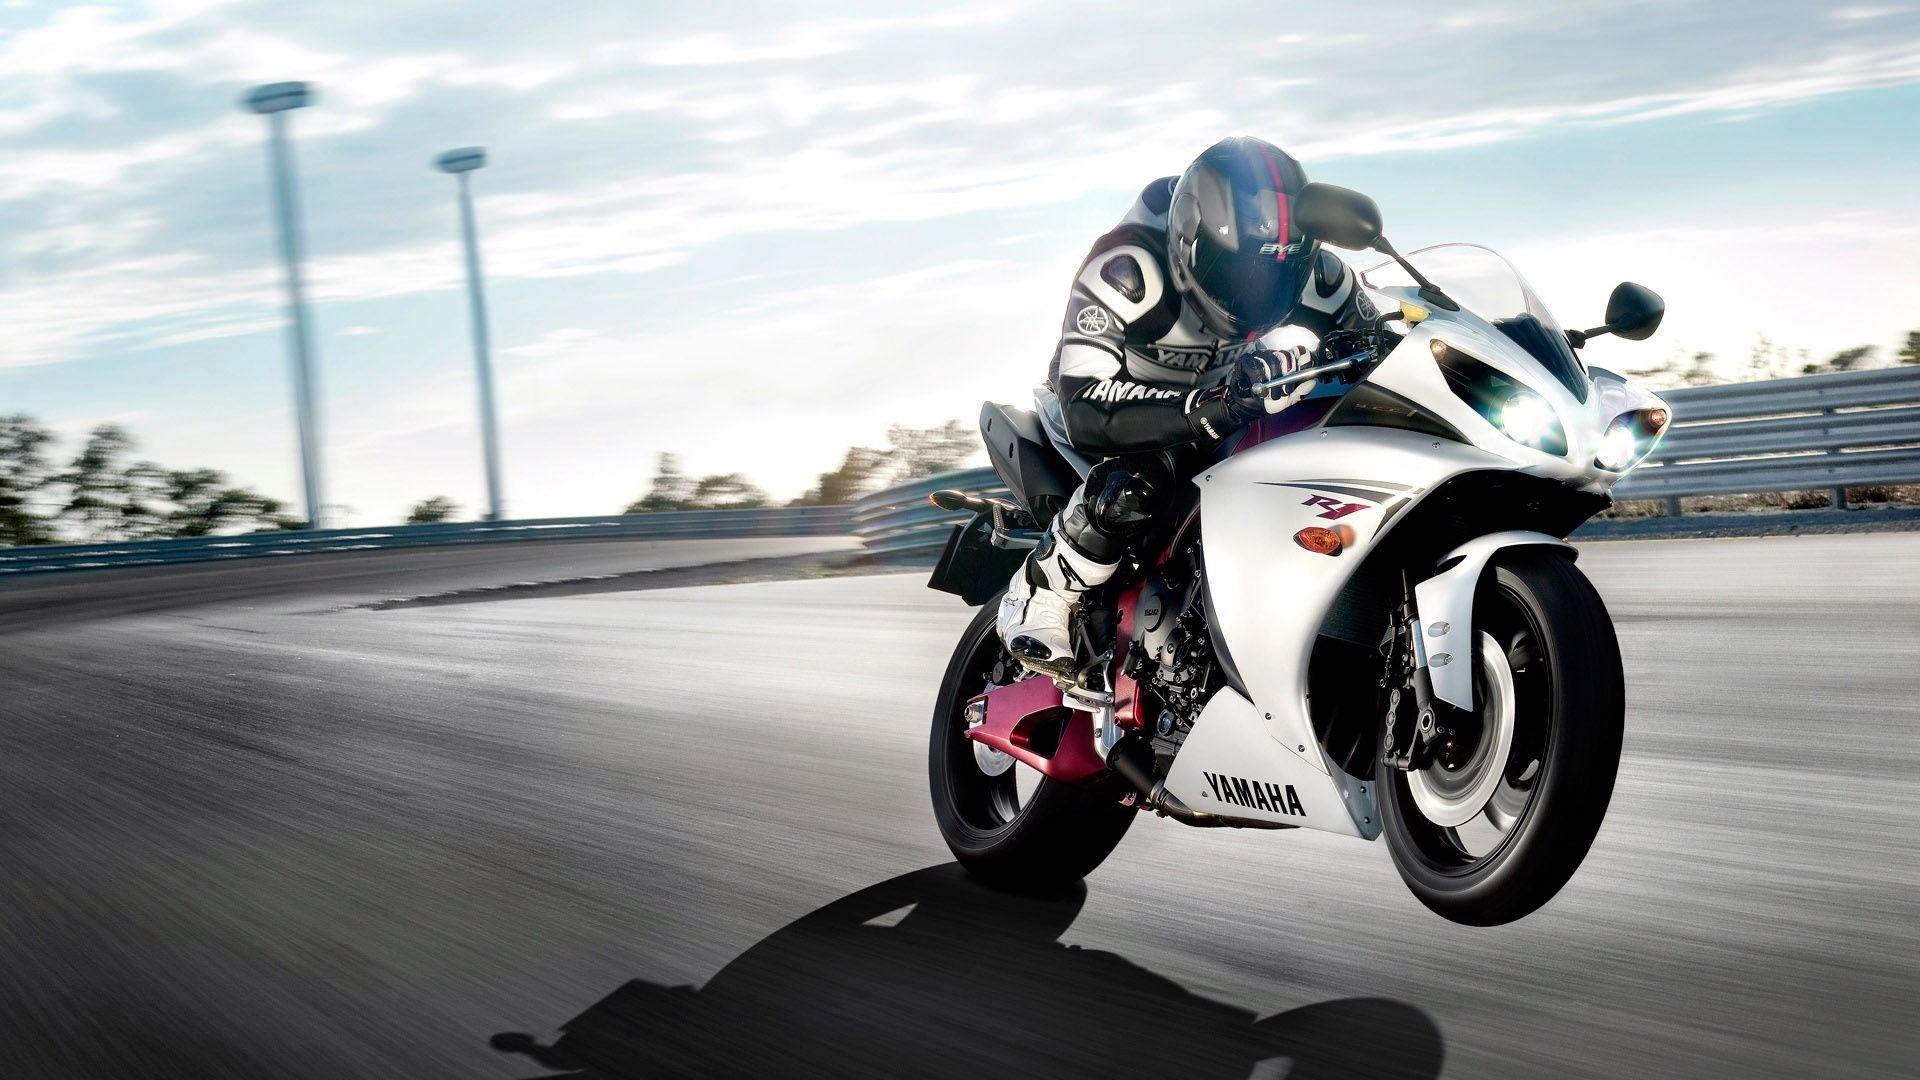 Super bikes wallpaper for free download about (350) wallpaper